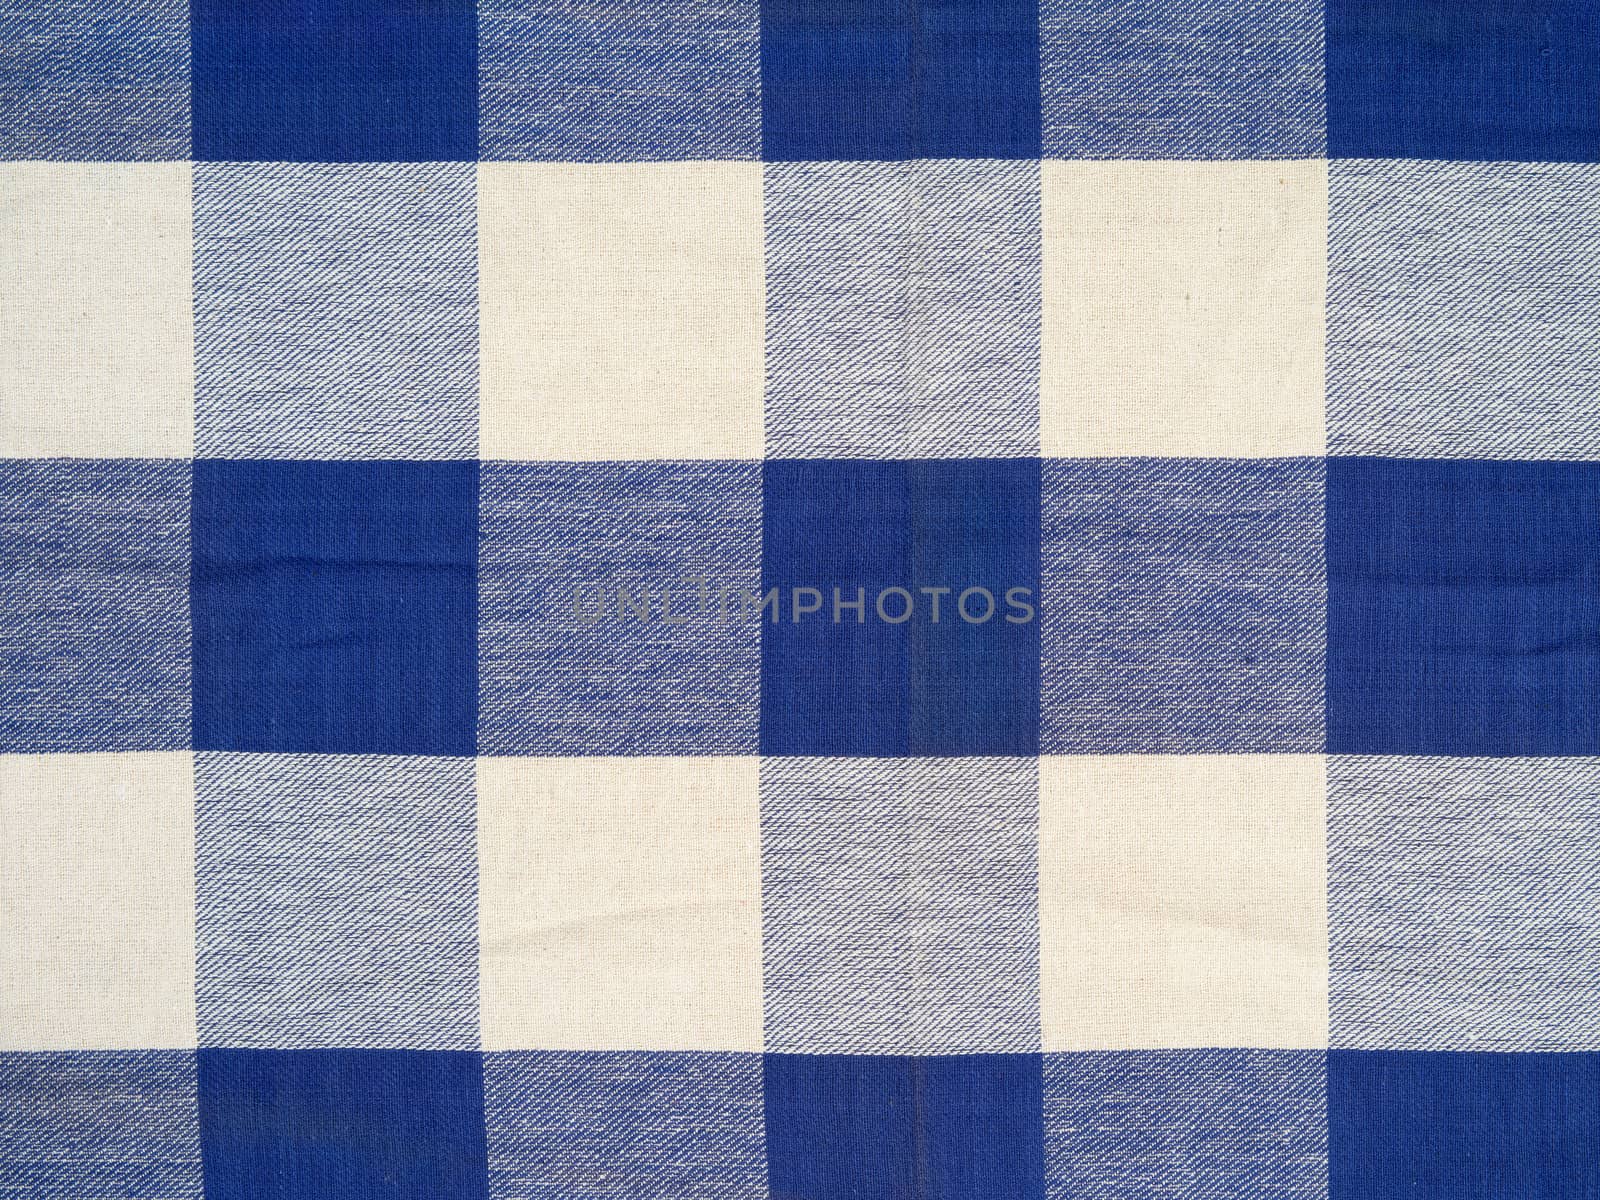 Photo of a blue checkered tablecloth.
